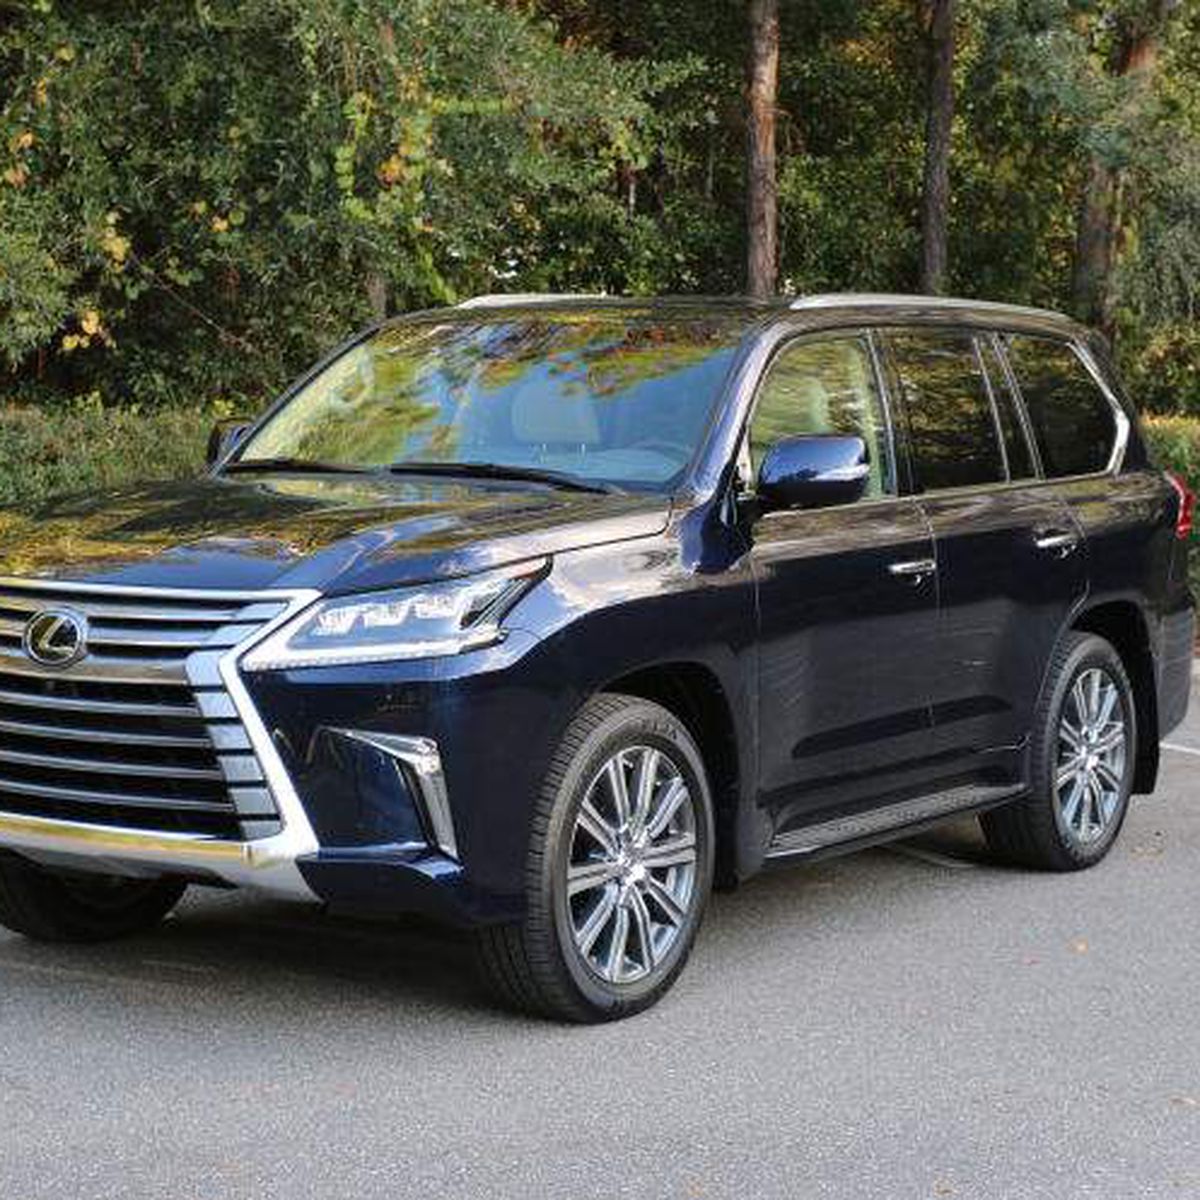 The Daily Drivers Update: 2017 Lexus LX570